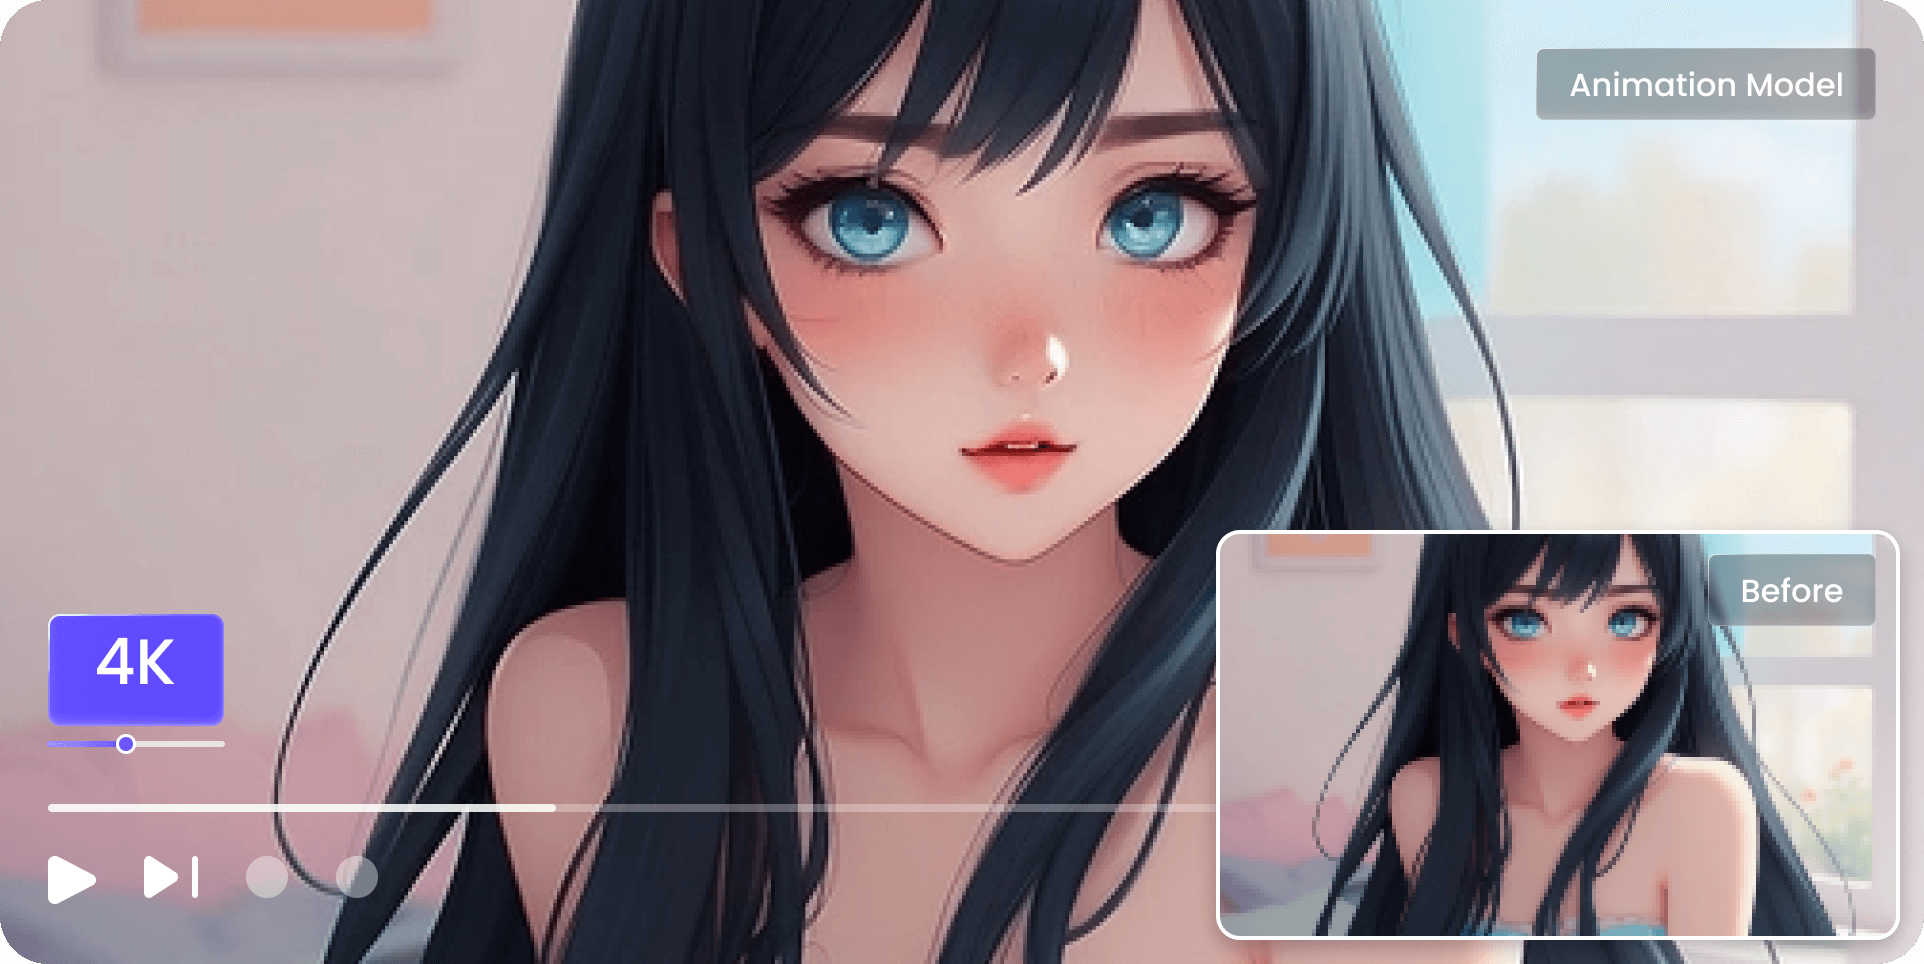 Upscale and increase the quality of your anime video from 1080p to 4k by  Mattytm | Fiverr